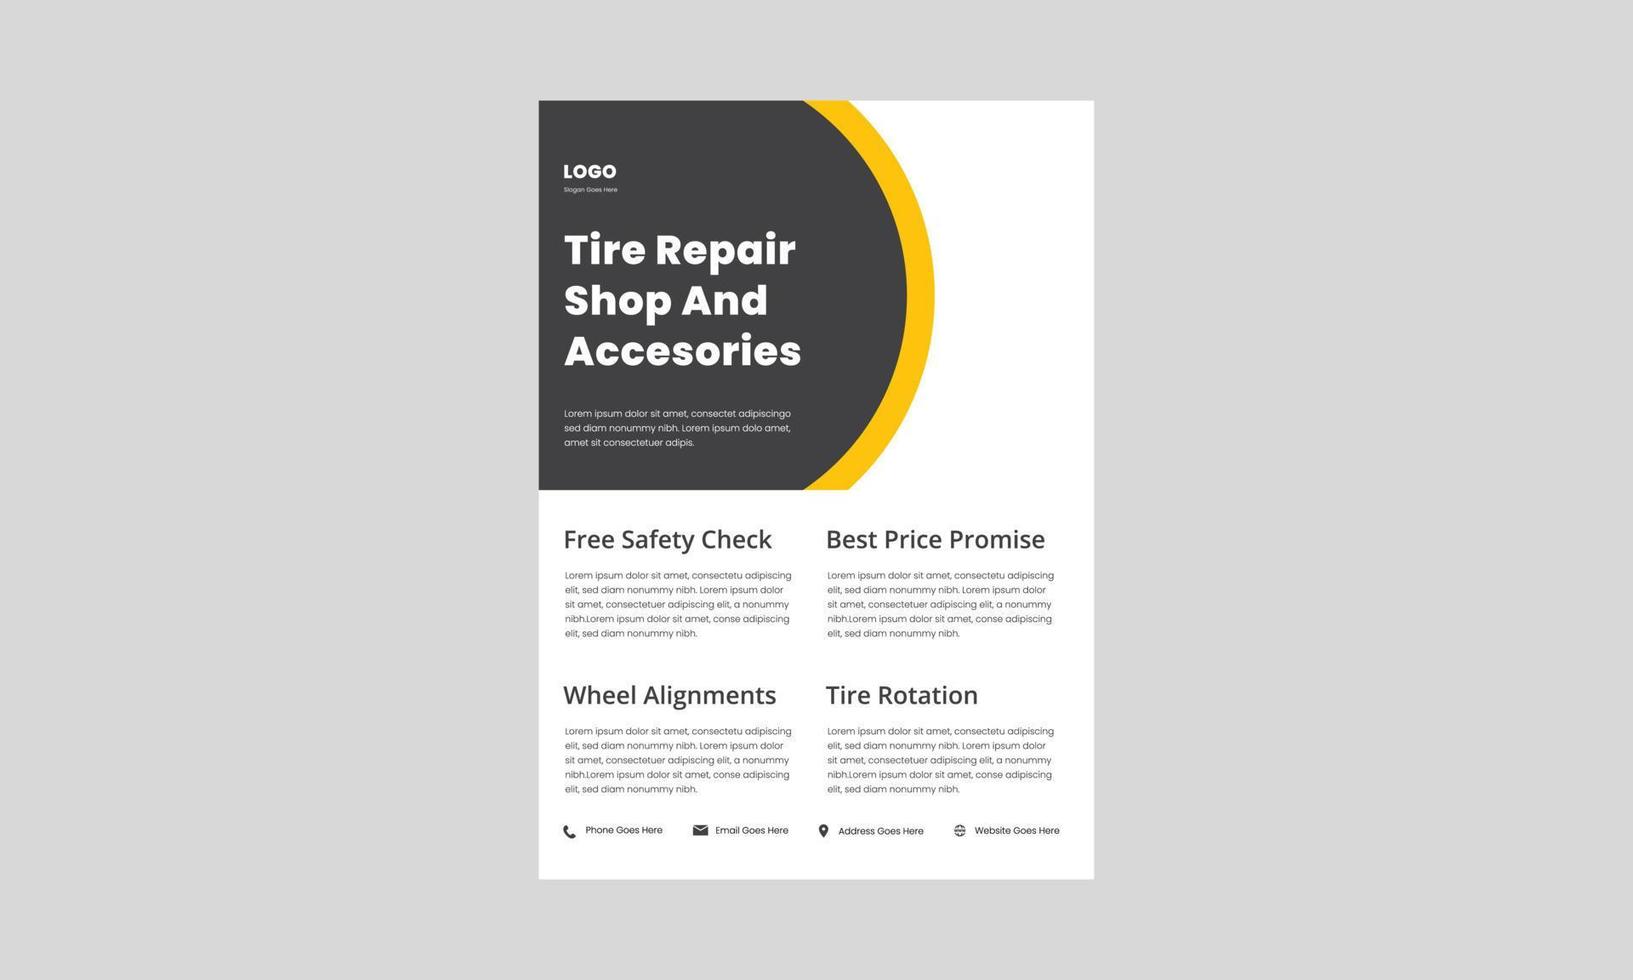 tire repair service flyer design template. local tire repair service poster, leaflet design. be ready for the winter tire repair flyer. vector